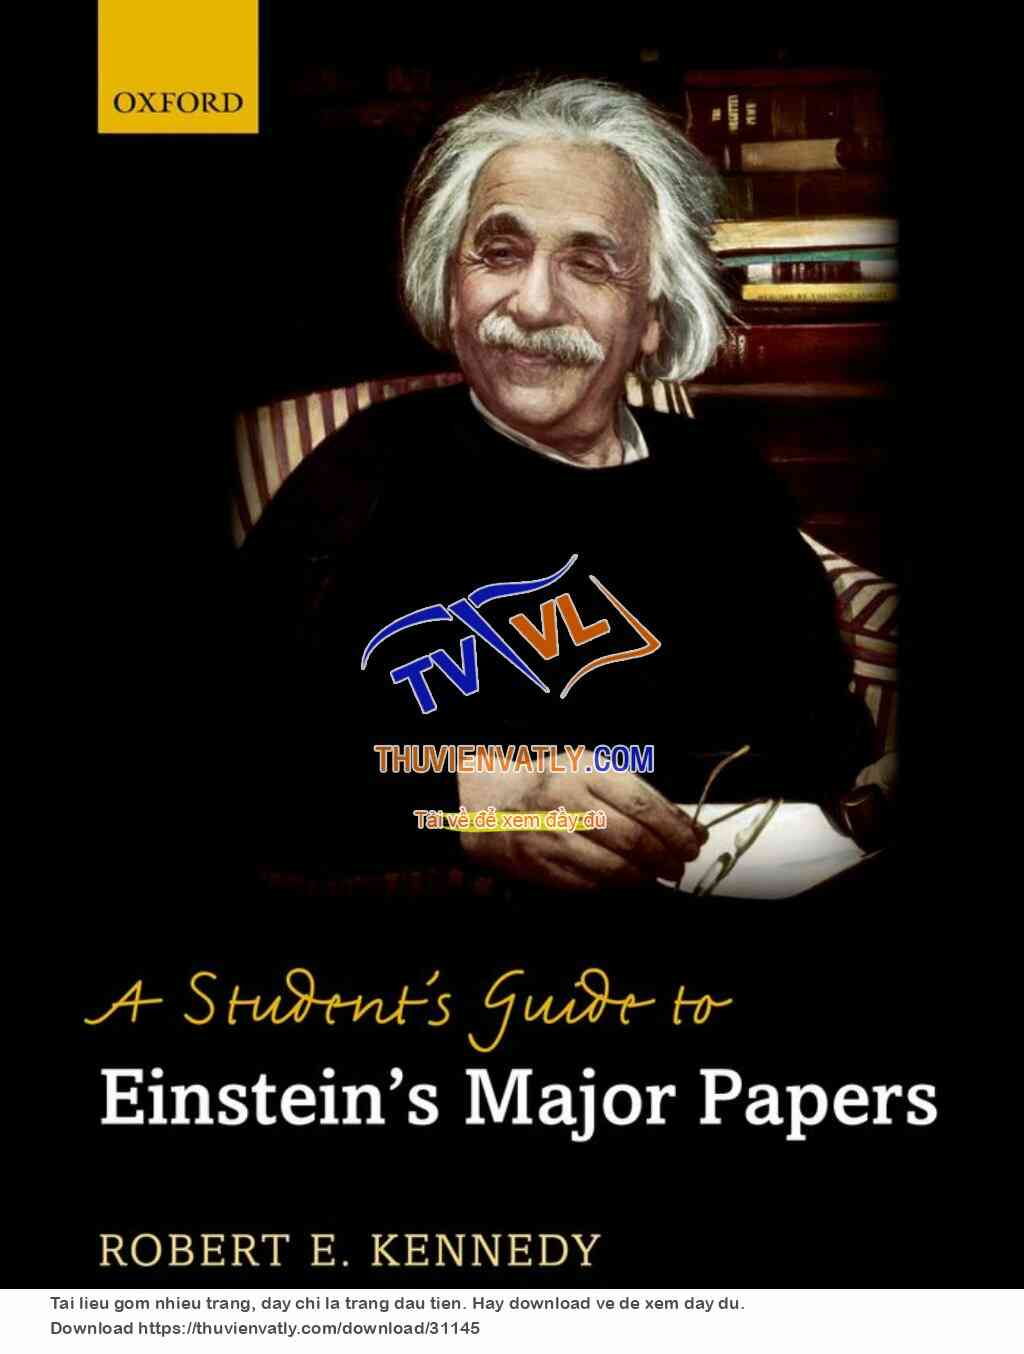 A Student’s Guide to Einstein’s Major Papers - RobertE.Kennedy, Oxford 2012